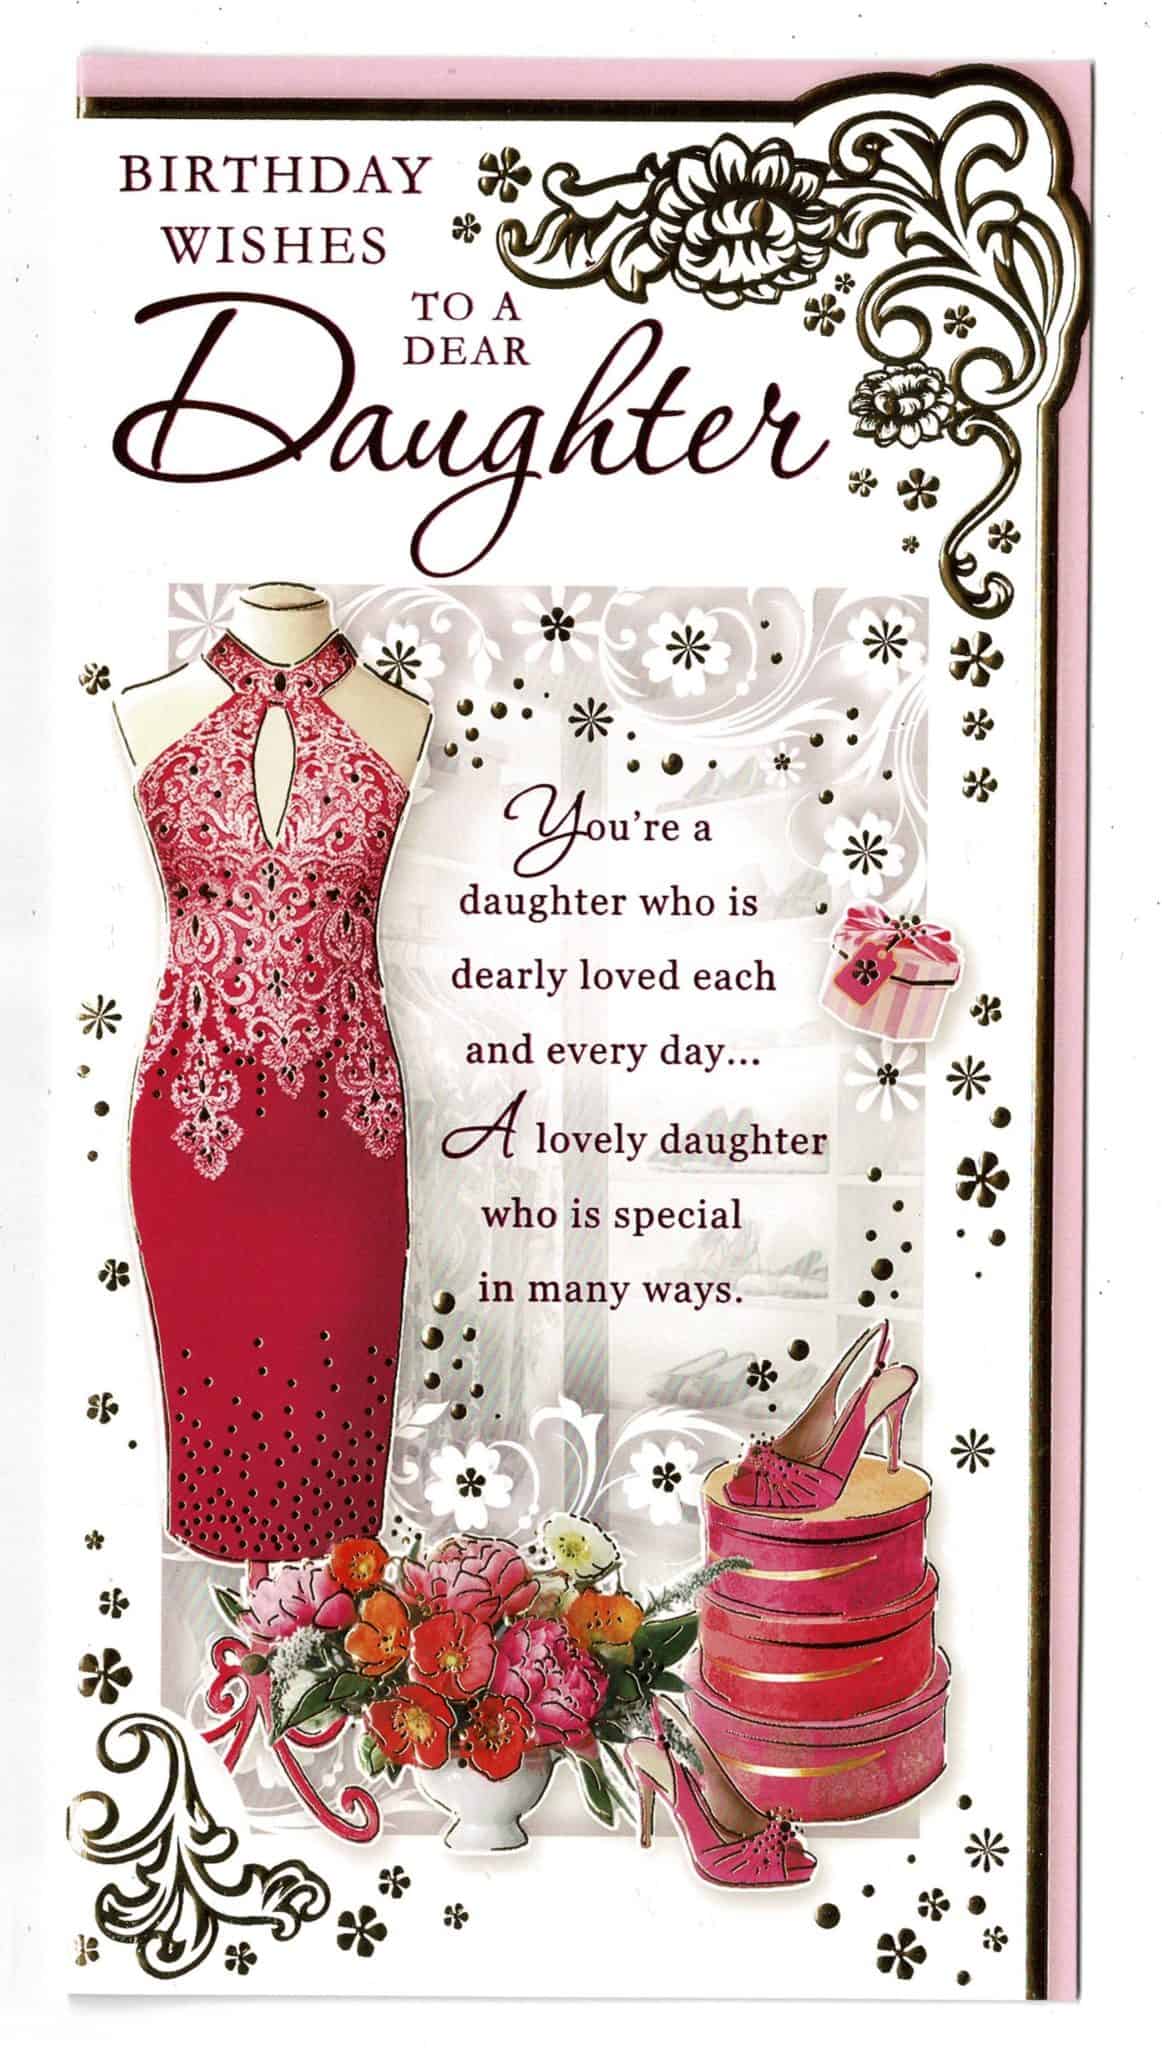 Daughter Birthday Card With Sentiment Verse Birthday Wishes To A Dear Daughter With Love 